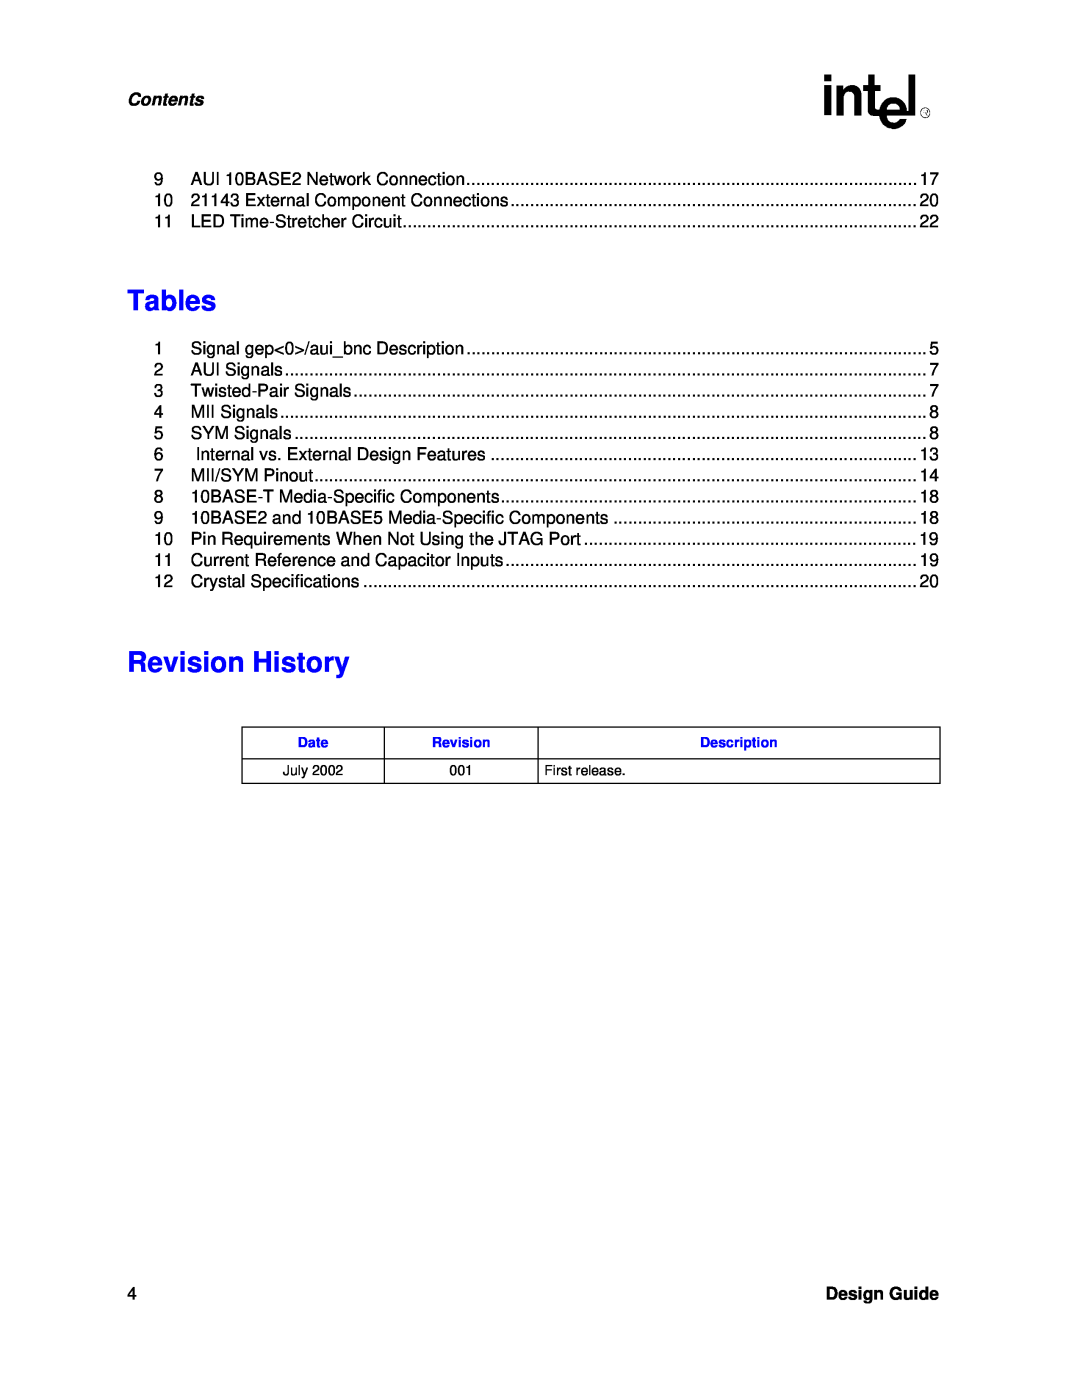 Intel 21143 manual Tables, Revision History, Contents, Design Guide 